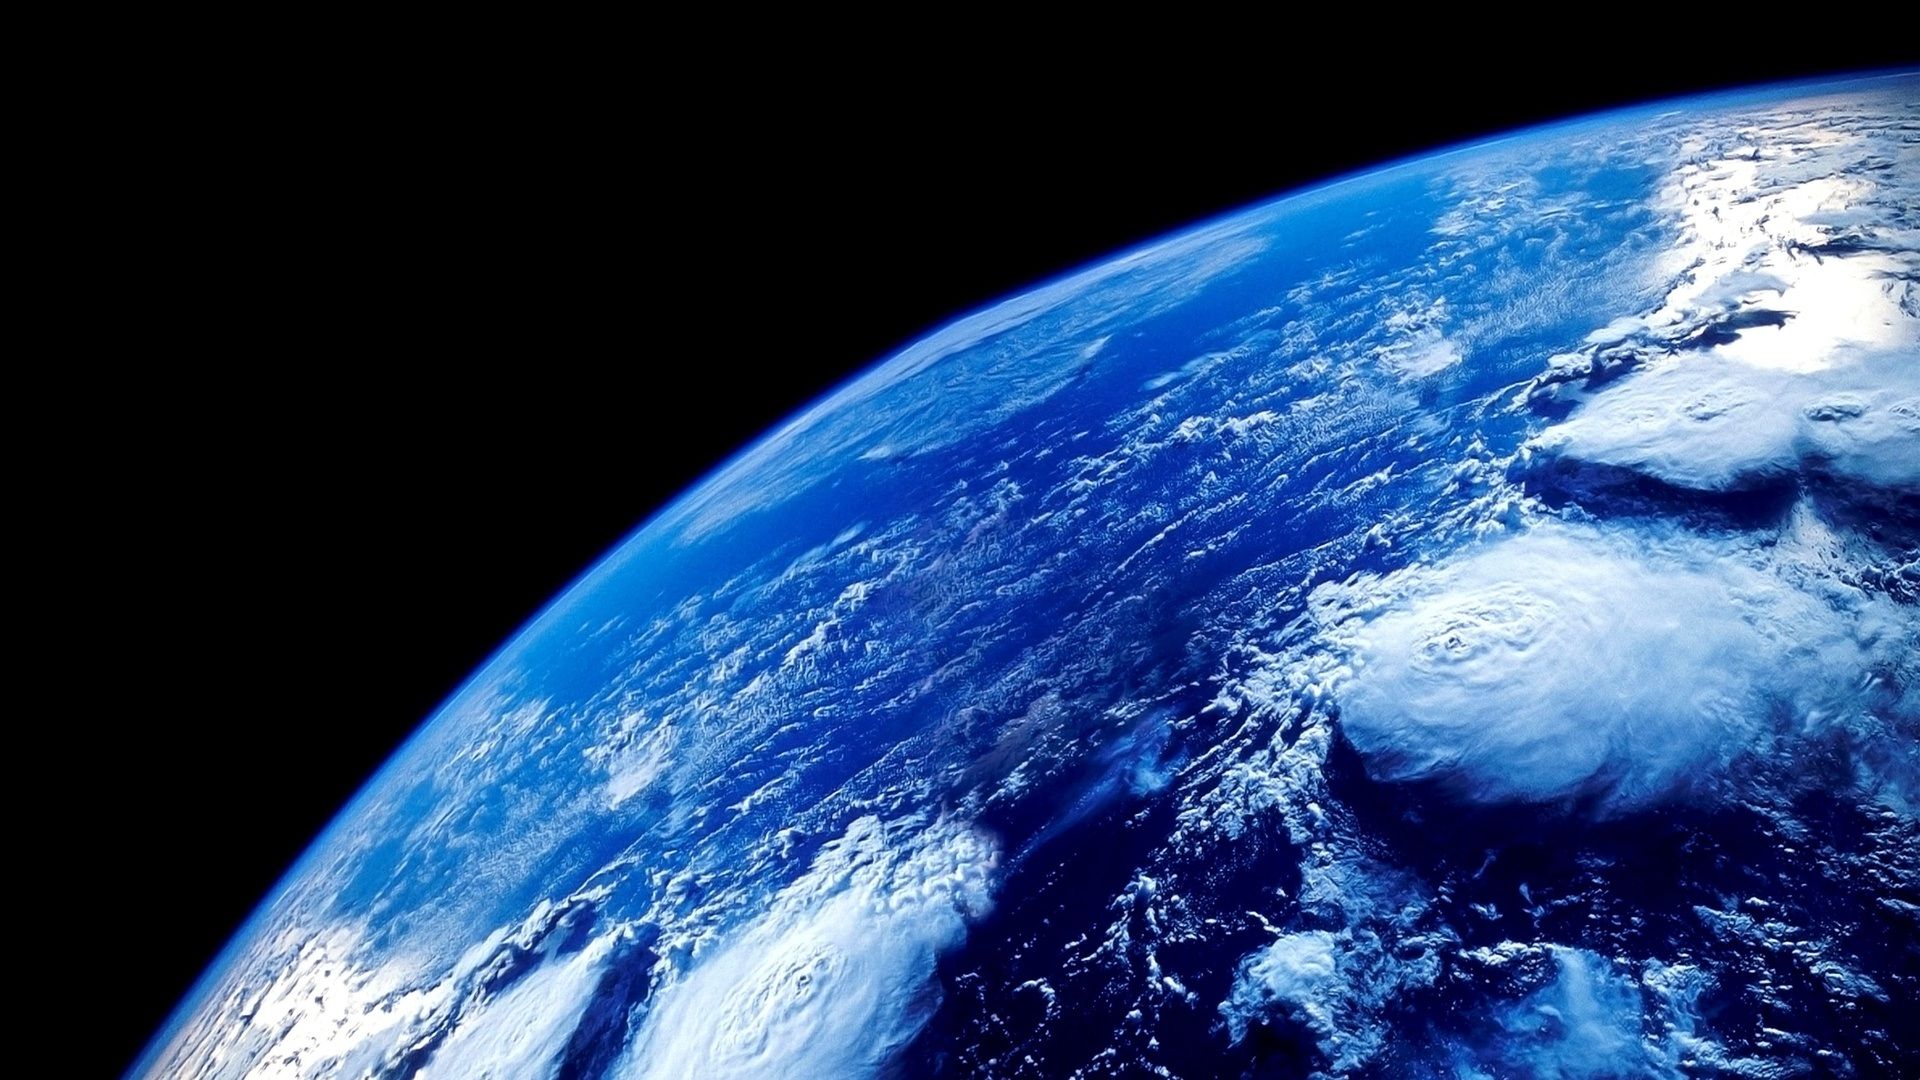 The Blue Planet background